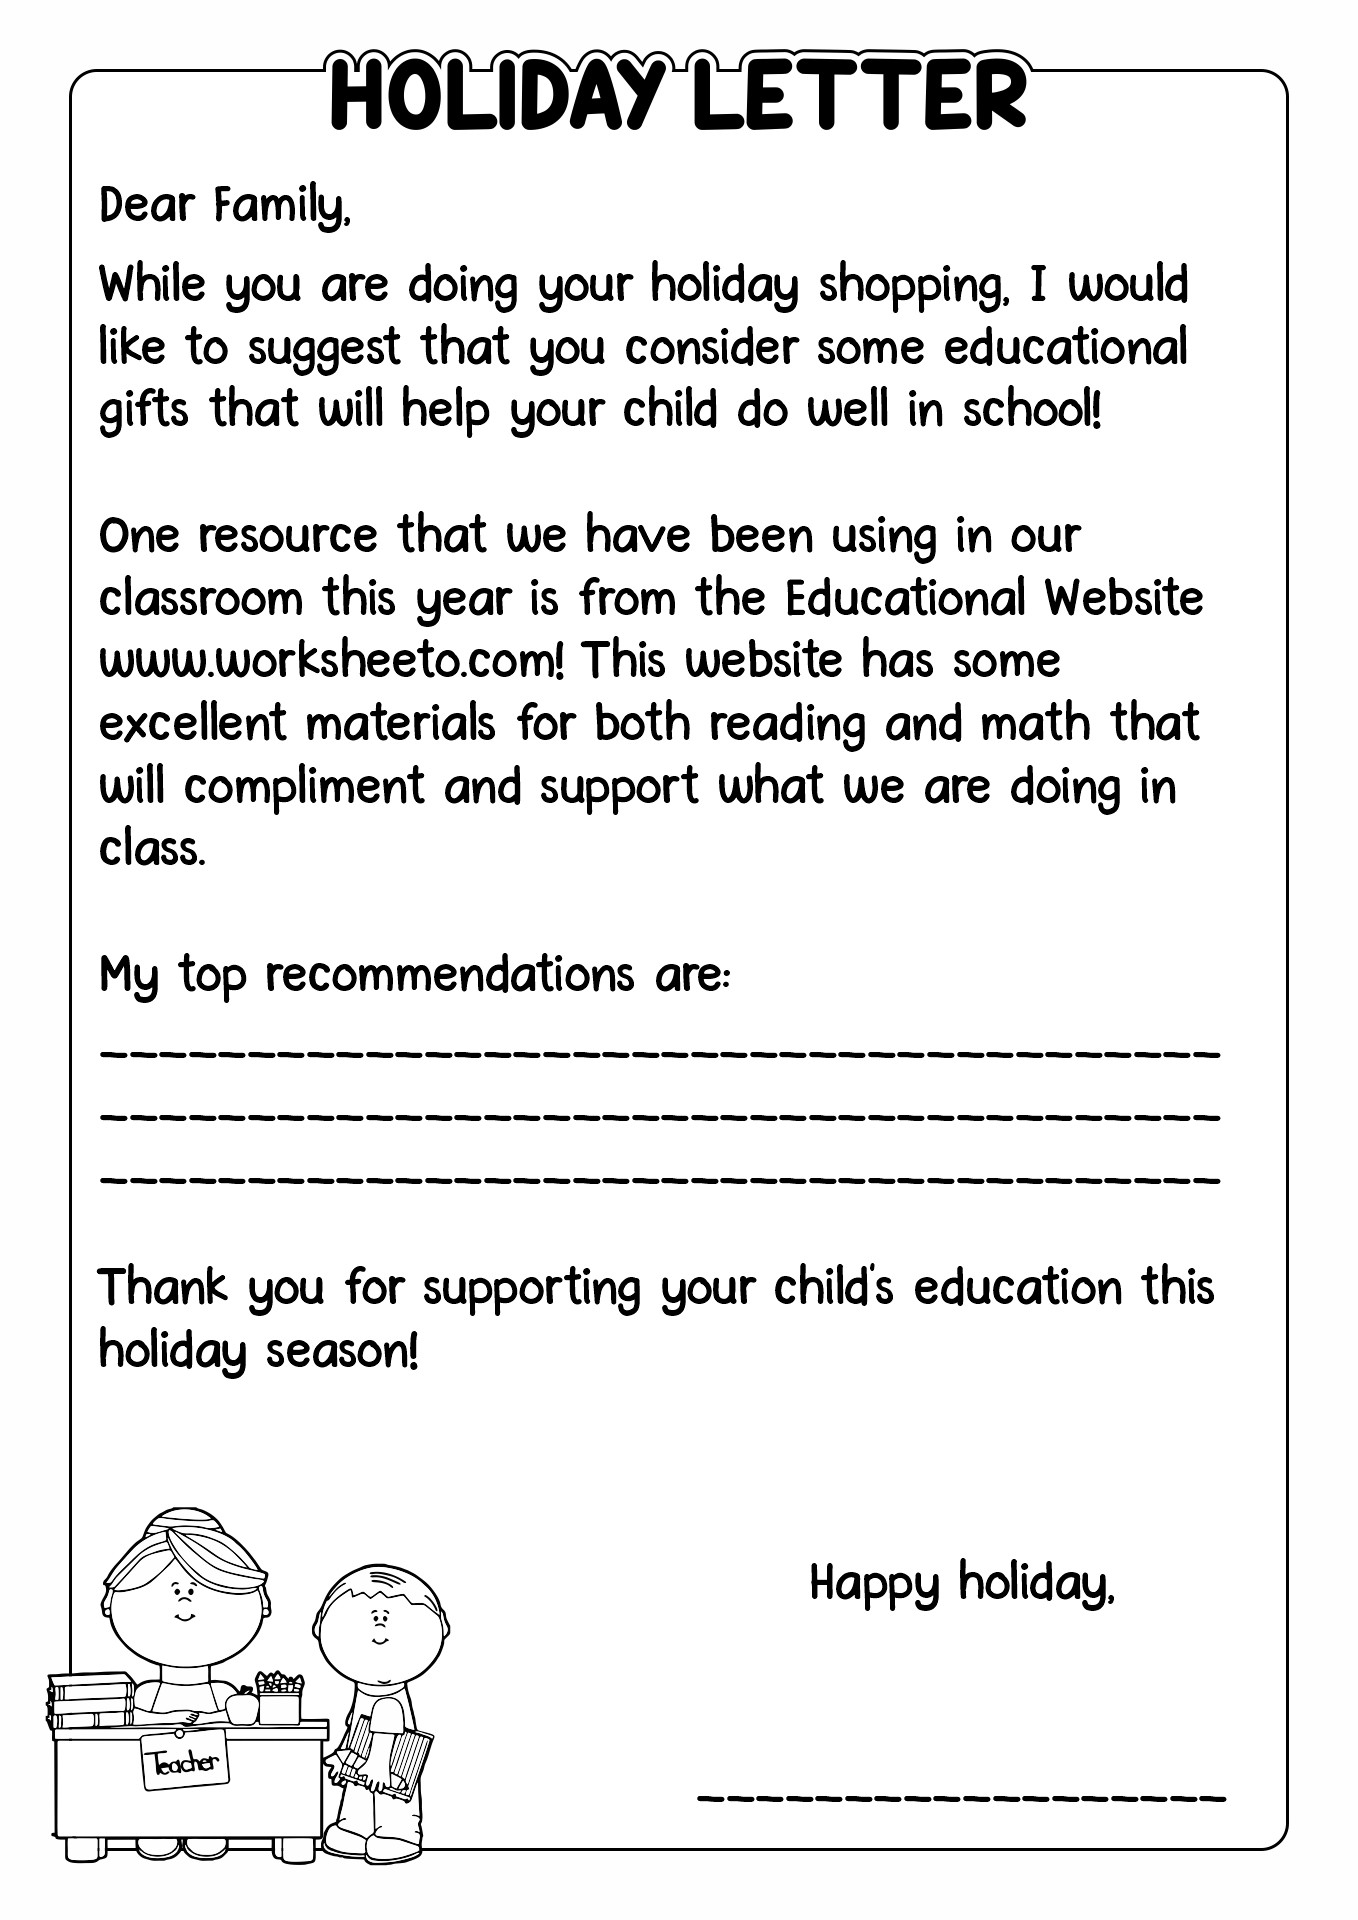 Holiday Letter to Parents From Teacher Image